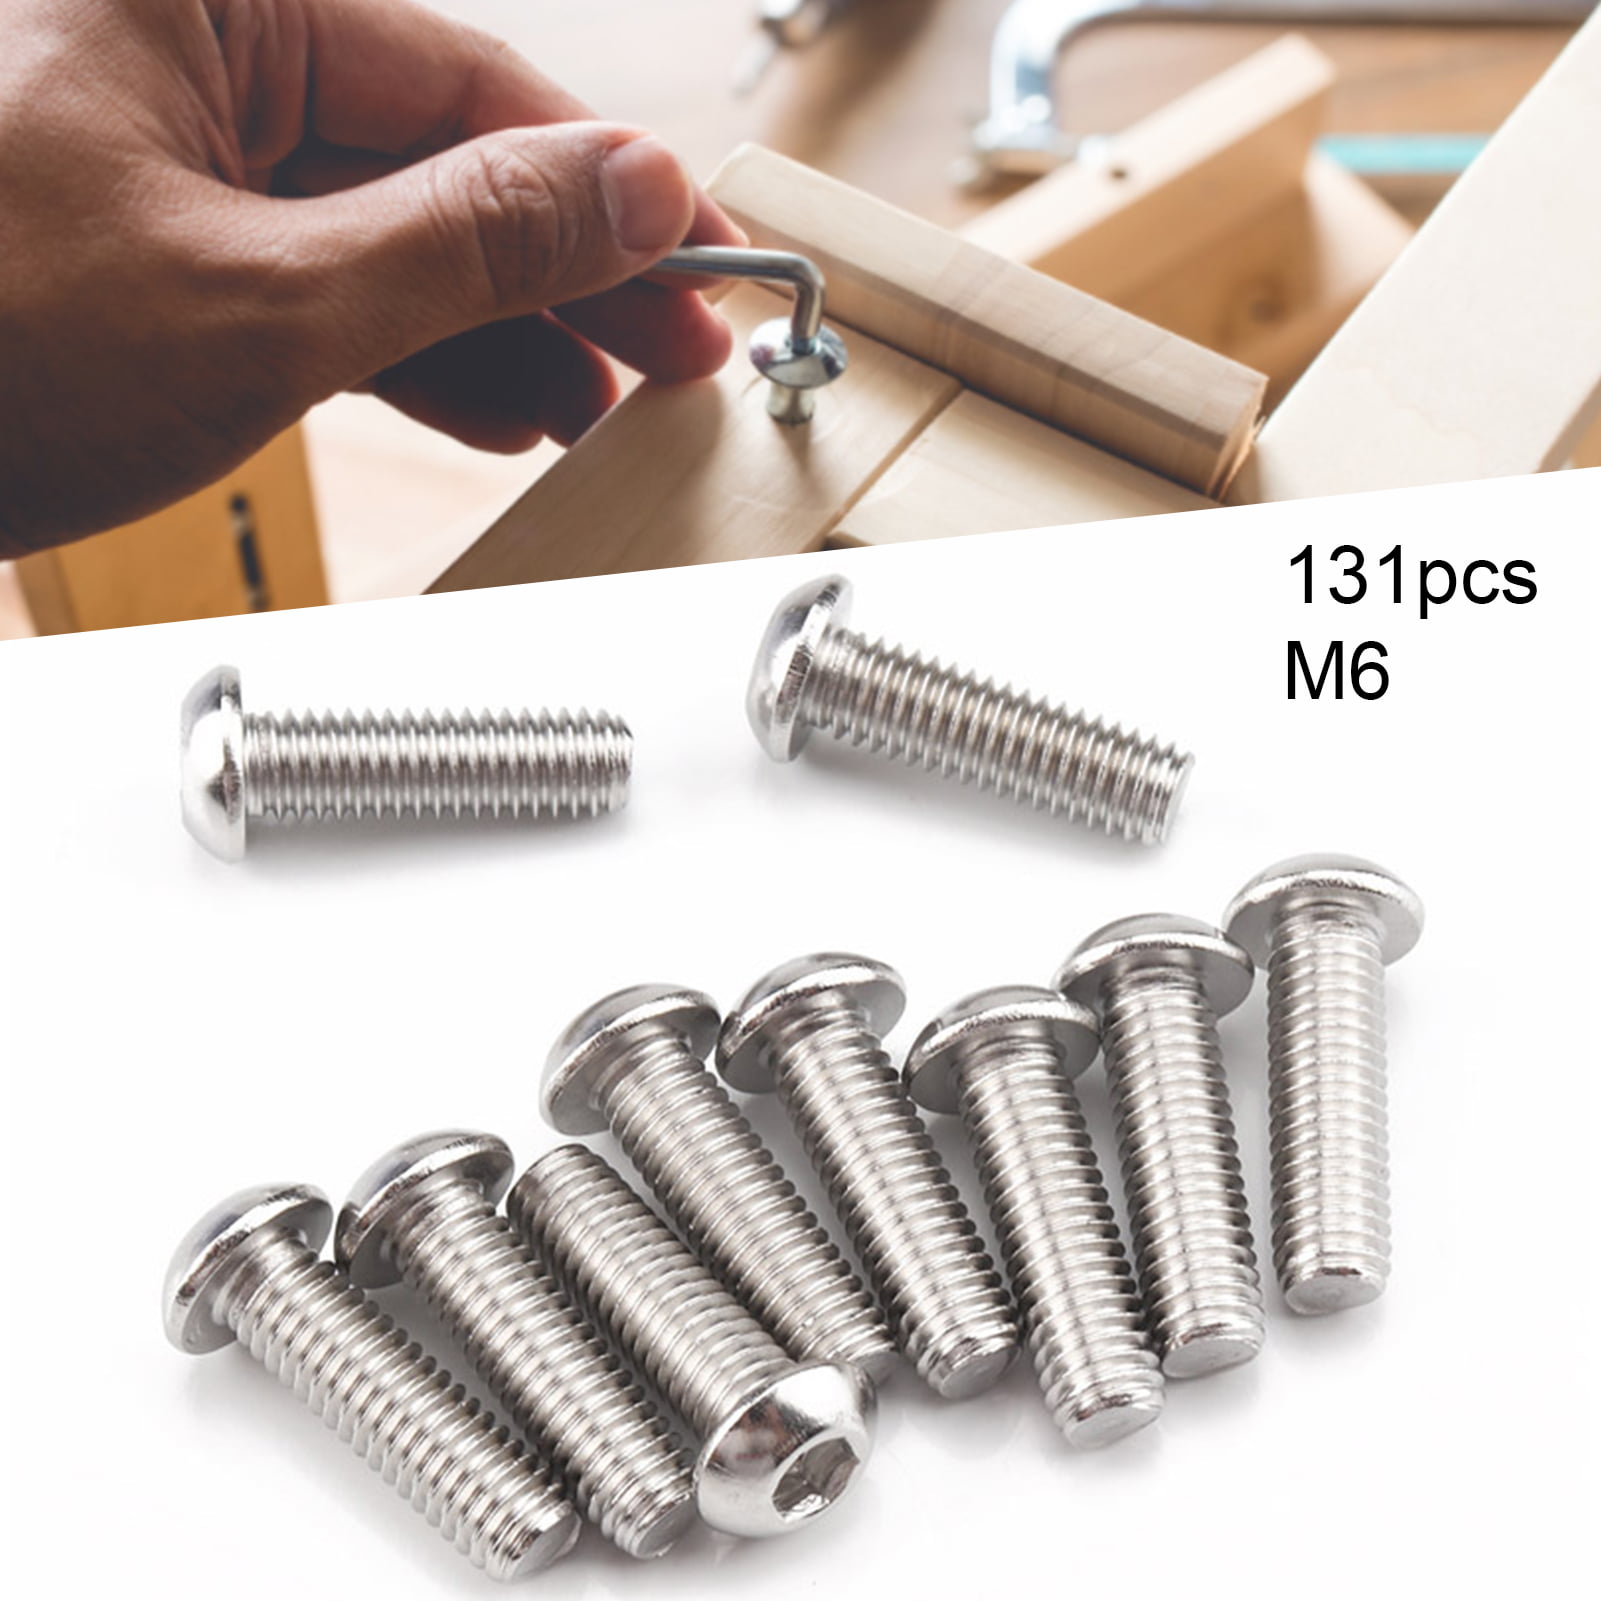 apprx. ? Hex Head Bolts Pack Of 25 1/4-28 X 1 3/16" Stainless